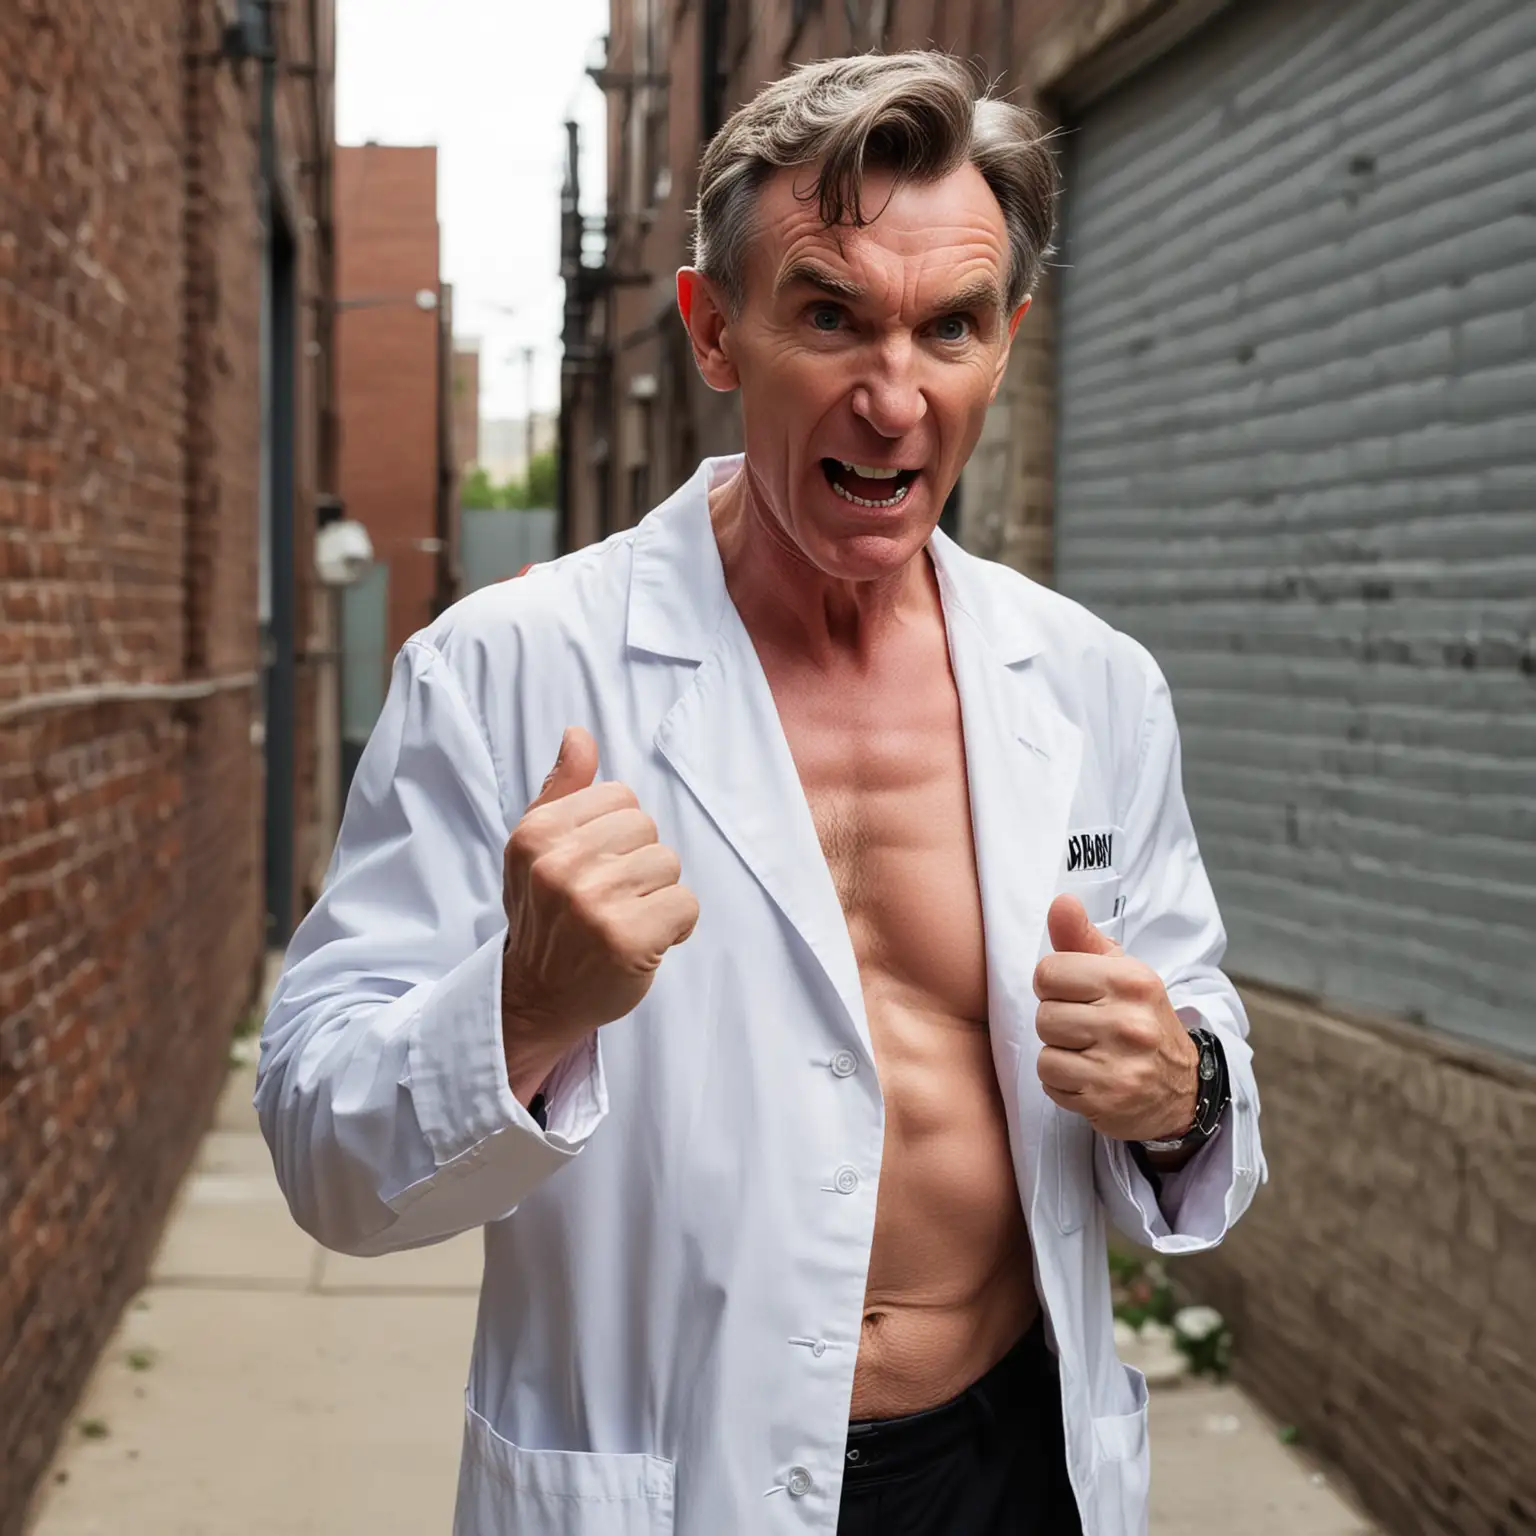 Bill nye the science guy, wearing a lab coat, no shirt, muscles, angry, punching, in a back alley, getting ready to fight, angry